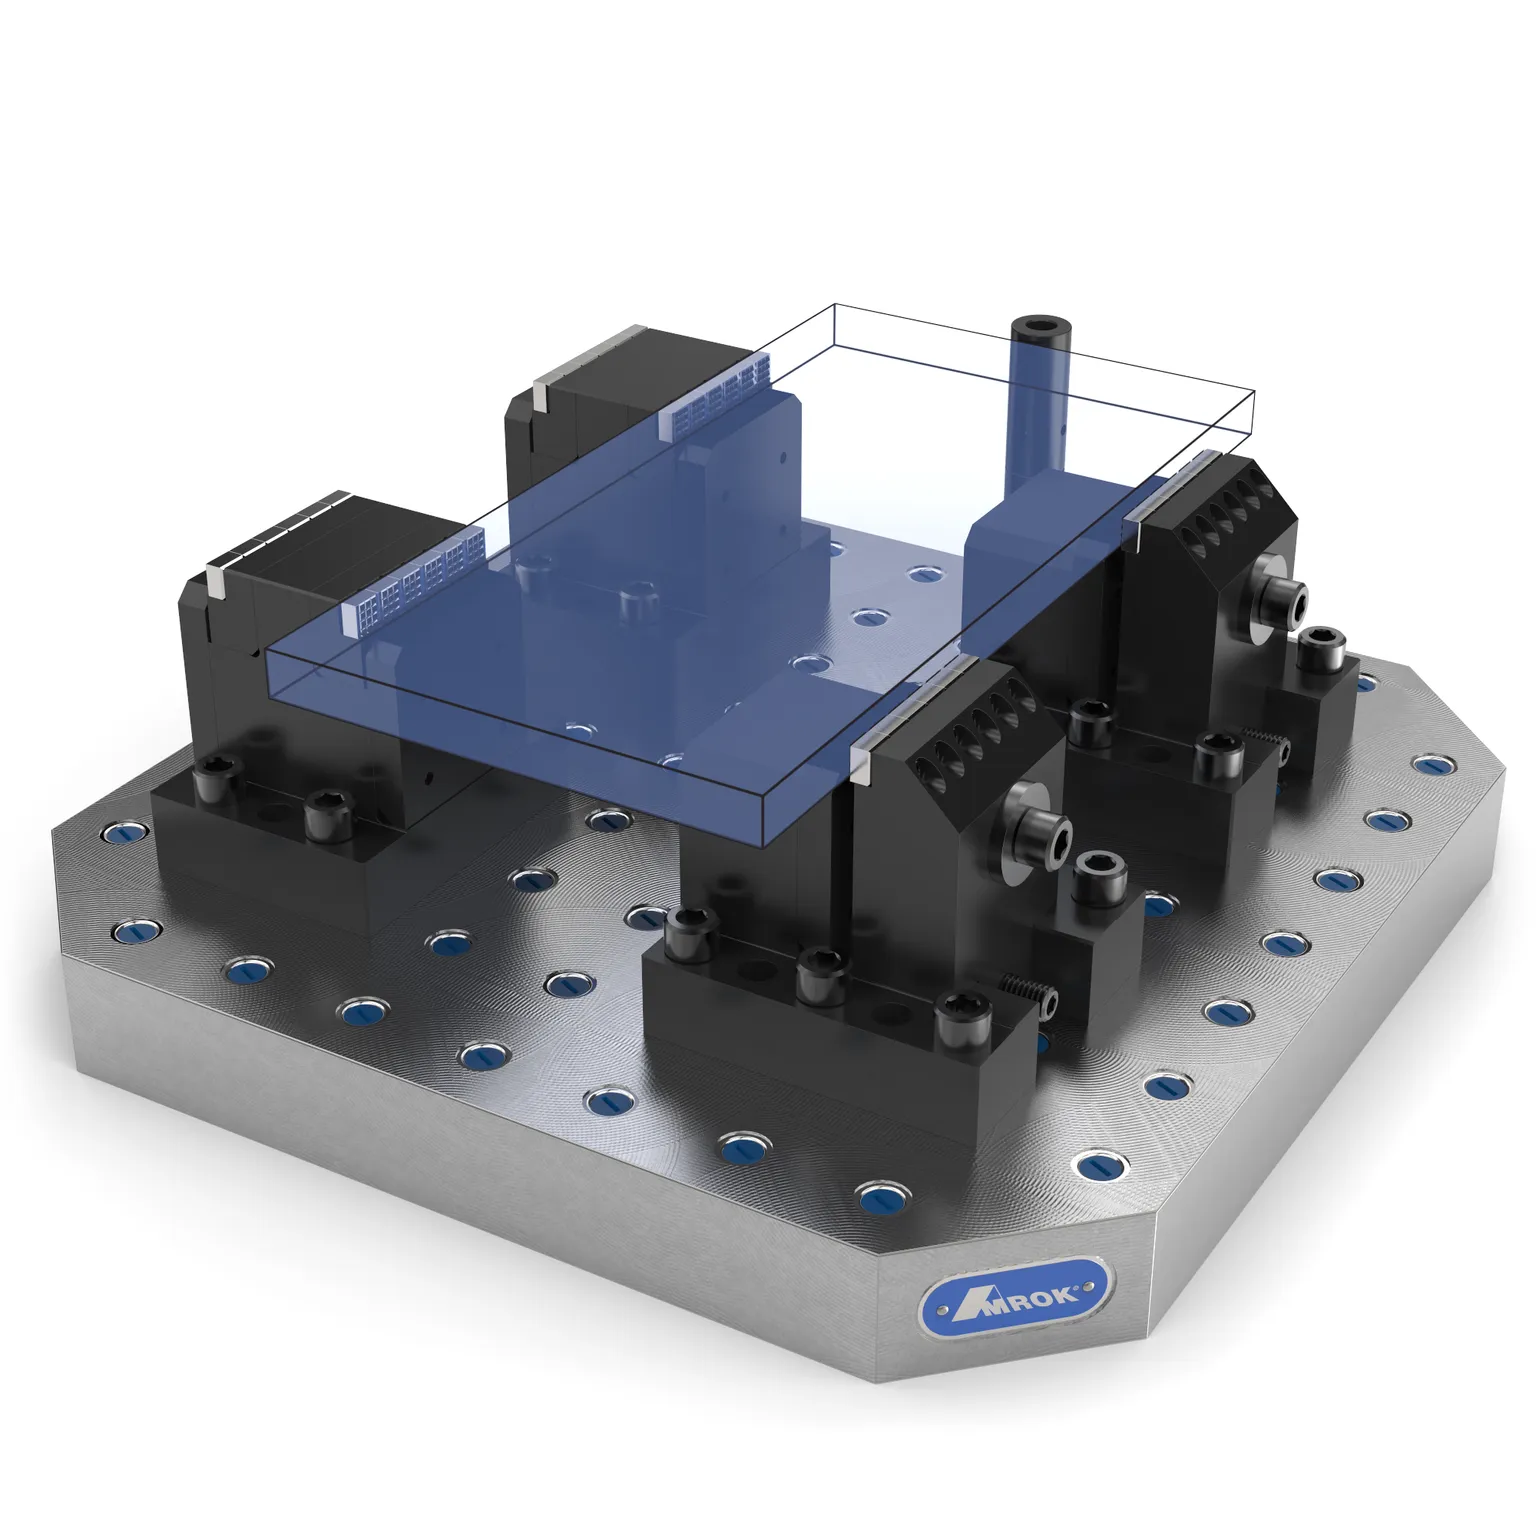 Vise Systems